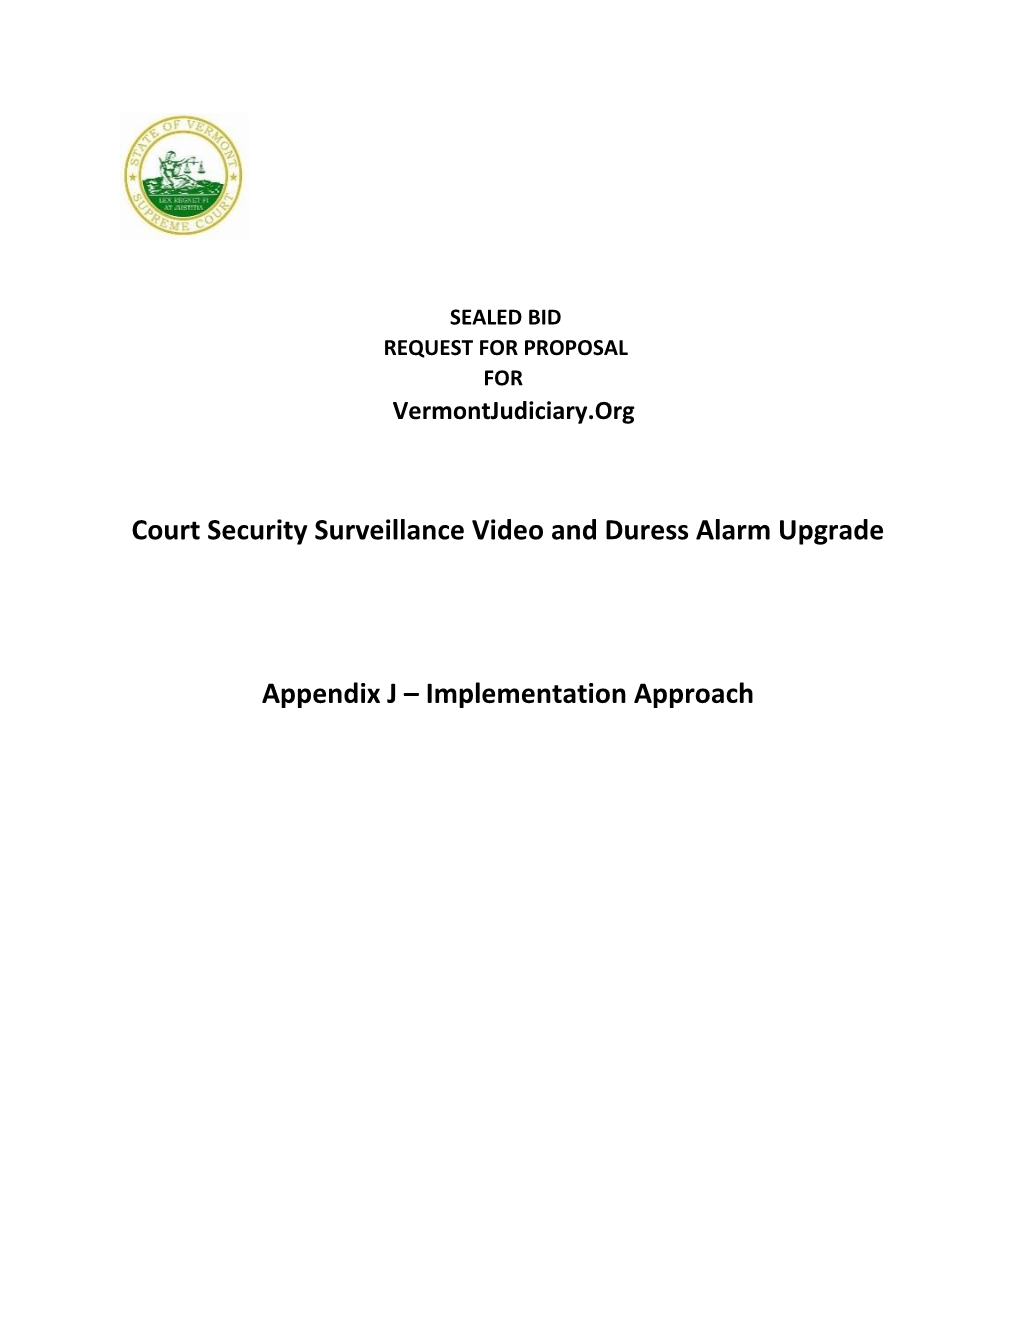 Court Security Surveillance Video and Duress Alarm Upgraderequest for Proposal Appendix J